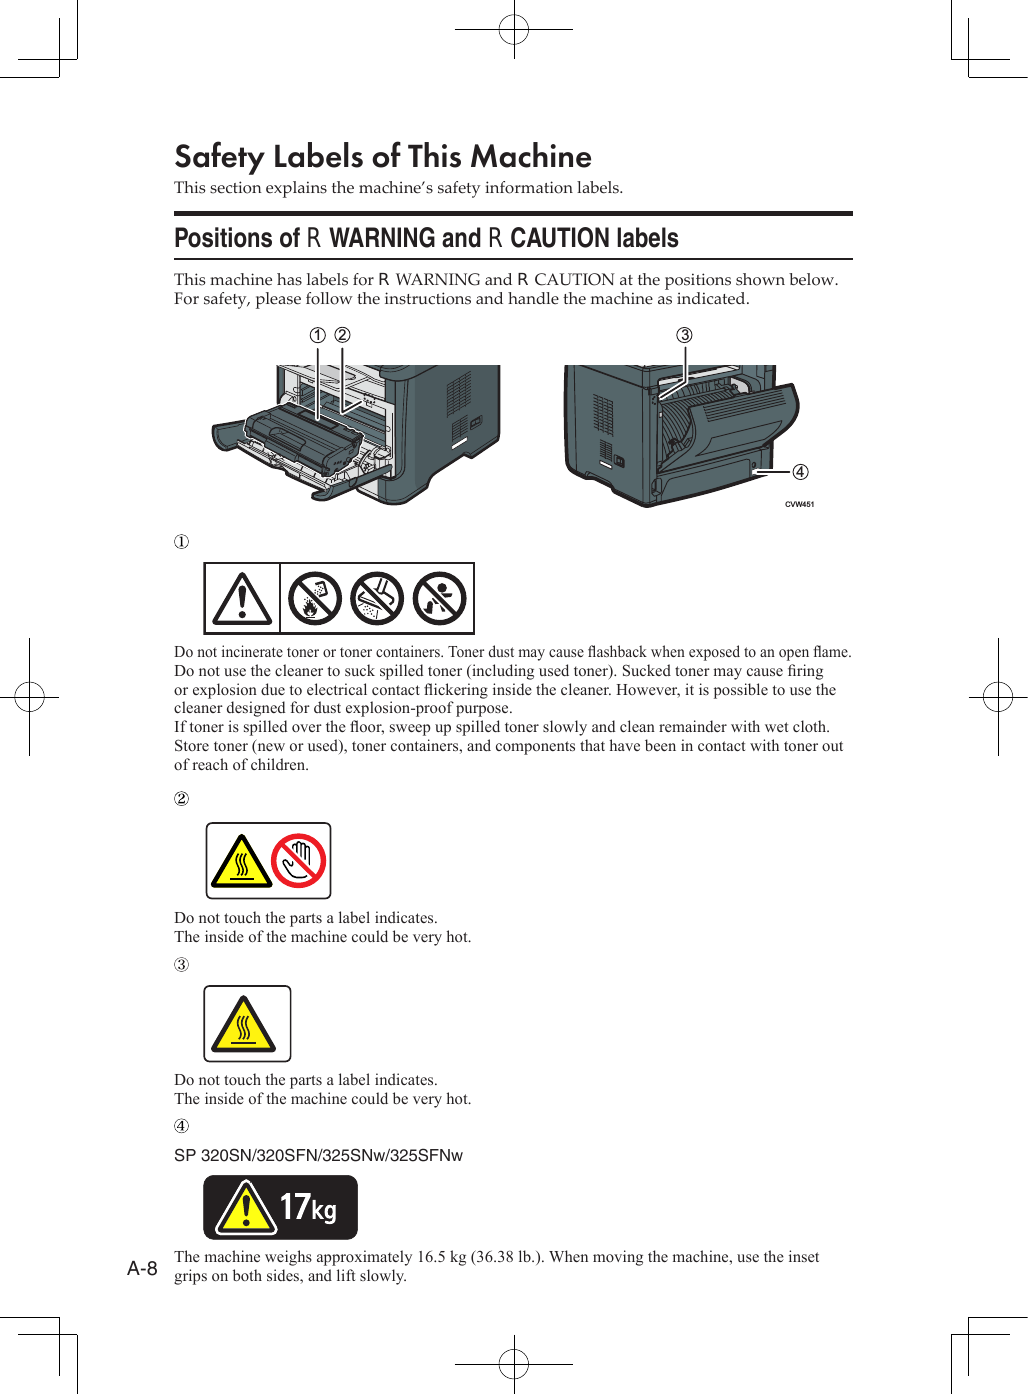 A-8Safety Labels of This MachineThis section explains the machine’s safety information labels.Positions of RWARNING and RCAUTION labelsThis machine has labels for RWARNING and RCAUTION at the positions shown below. For safety, please follow the instructions and handle the machine as indicated.CVW4513124Do not incinerate toner or toner containers. Toner dust may cause ashback when exposed to an open ame.Do not use the cleaner to suck spilled toner (including used toner). Sucked toner may cause ring or explosion due to electrical contact ickering inside the cleaner. However, it is possible to use the cleaner designed for dust explosion-proof purpose. If toner is spilled over the oor, sweep up spilled toner slowly and clean remainder with wet cloth.Store toner (new or used), toner containers, and components that have been in contact with toner out of reach of children.Do not touch the parts a label indicates.The inside of the machine could be very hot.Do not touch the parts a label indicates.The inside of the machine could be very hot.SP 320SN/320SFN/325SNw/325SFNwThe machine weighs approximately 16.5 kg (36.38 lb.). When moving the machine, use the inset grips on both sides, and lift slowly.